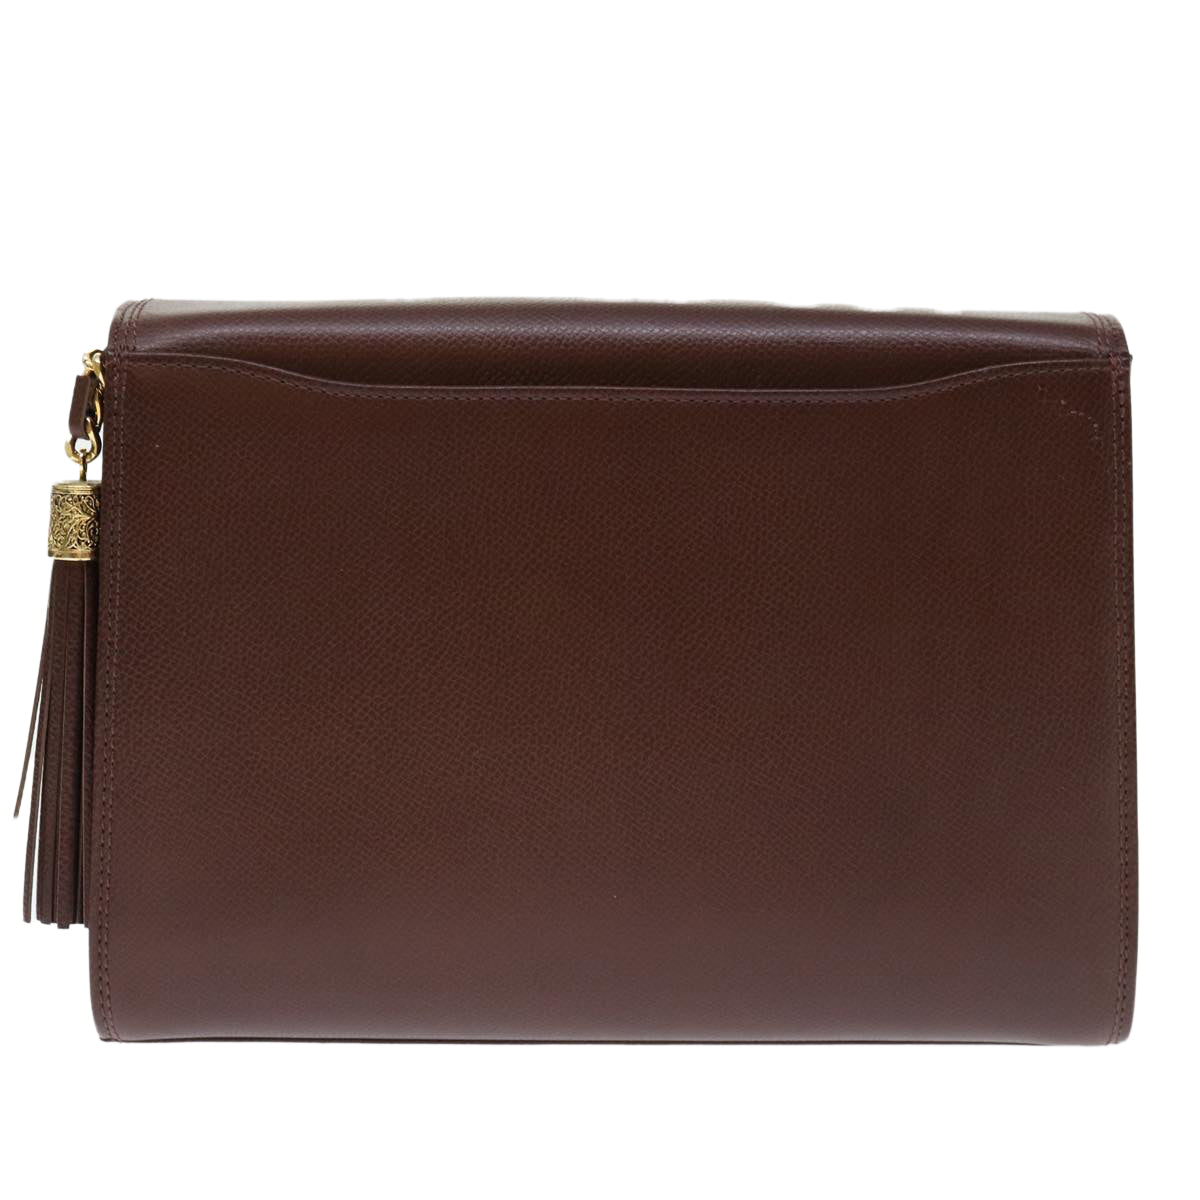 VALENTINO Clutch Bag Leather Brown Auth ar11516 - 0